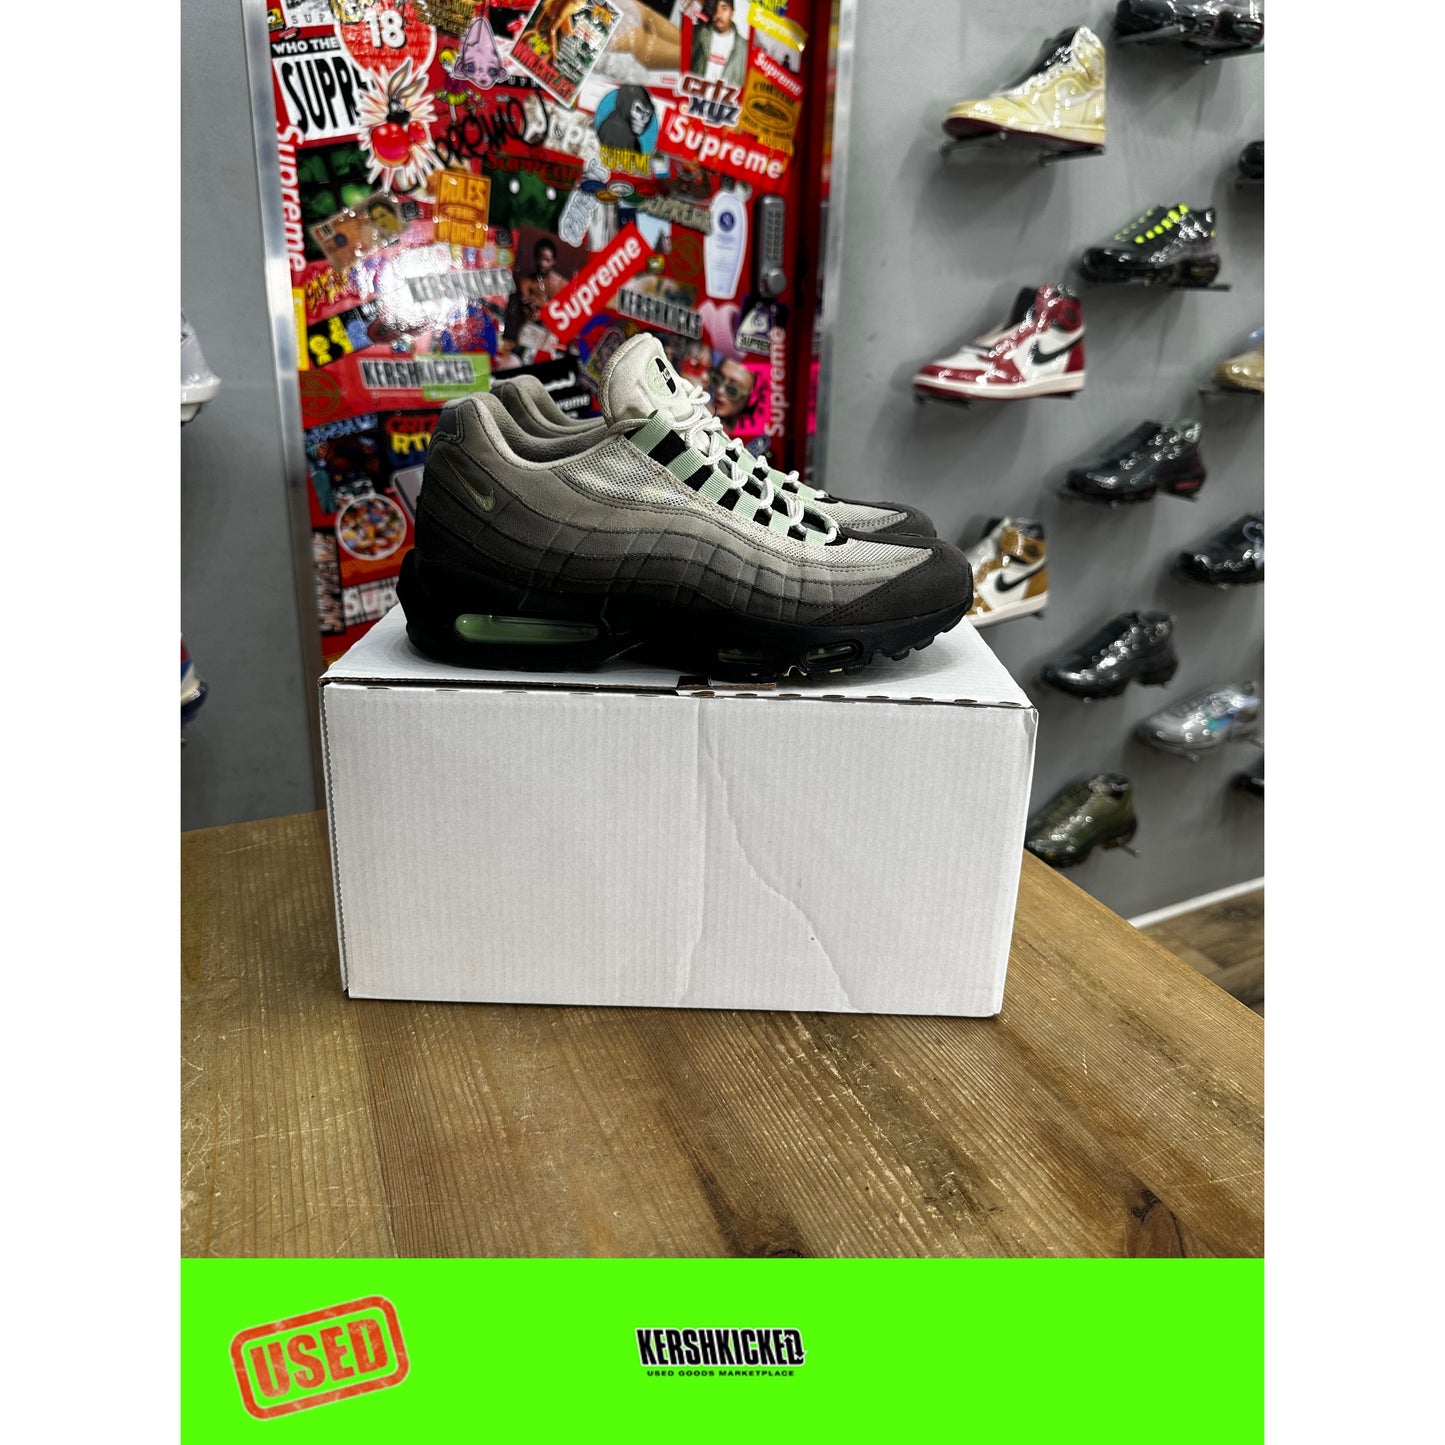 Nike Air Max 95 Fresh Mint UK 7 by Nike from £166.99